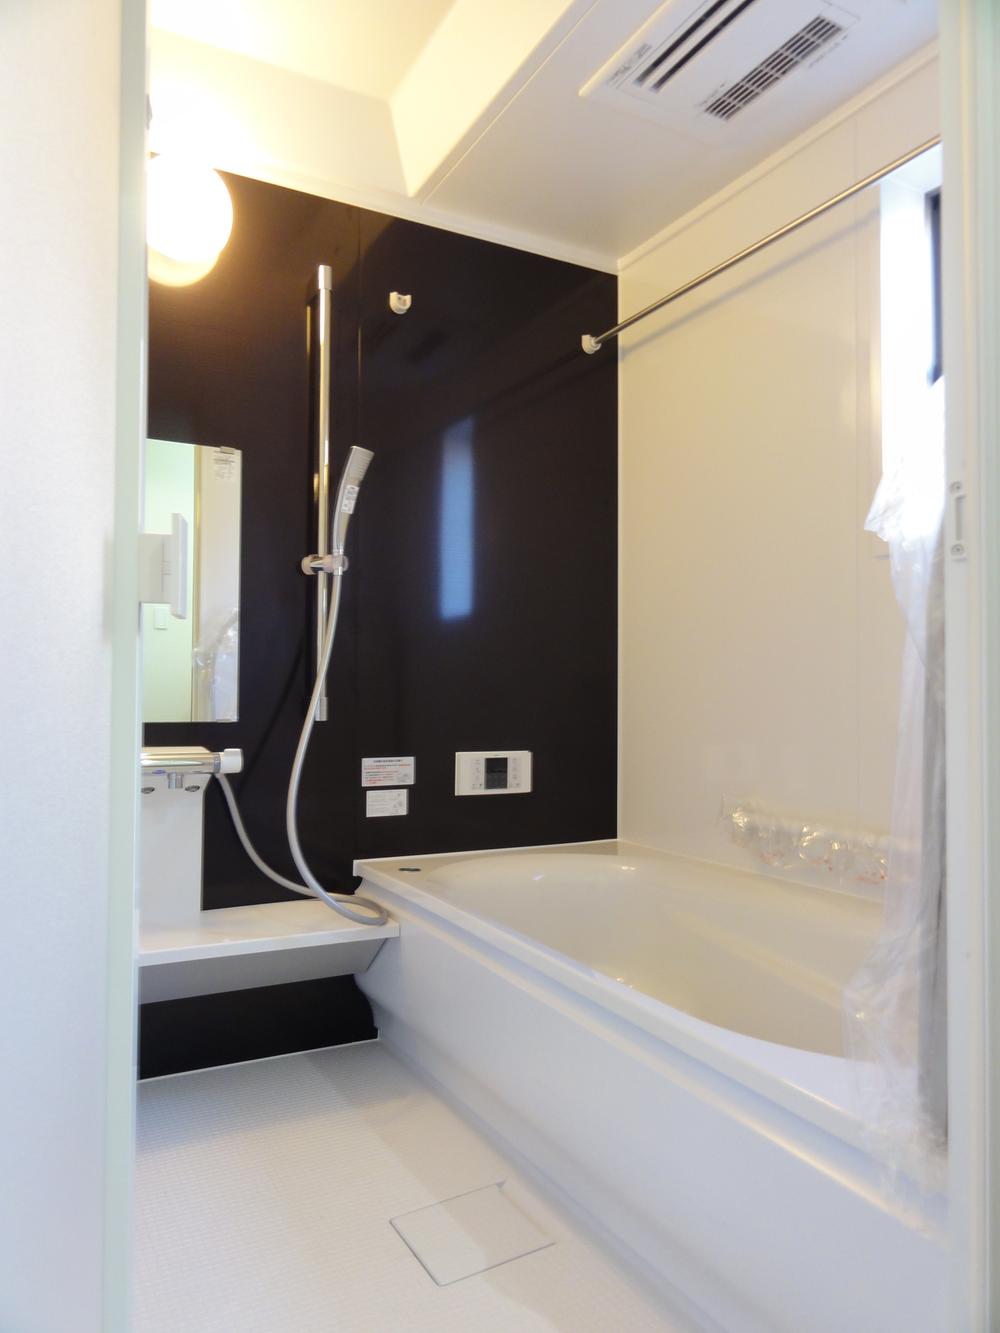 Same specifications photo (bathroom). Unit bus with washing and drying machine! 